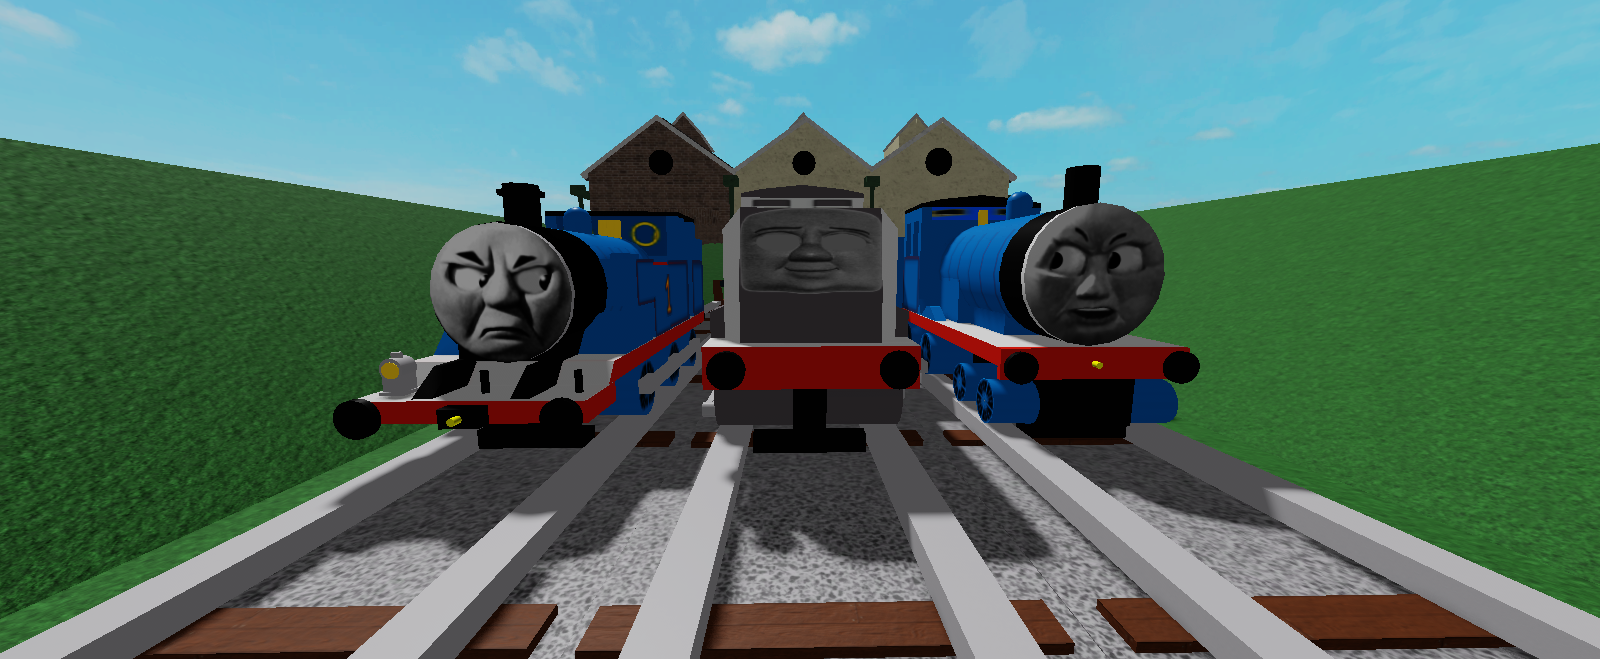 Sodor Short Bludger Roblox Remake By Kenzaur On Deviantart - real thomas and friends on roblox